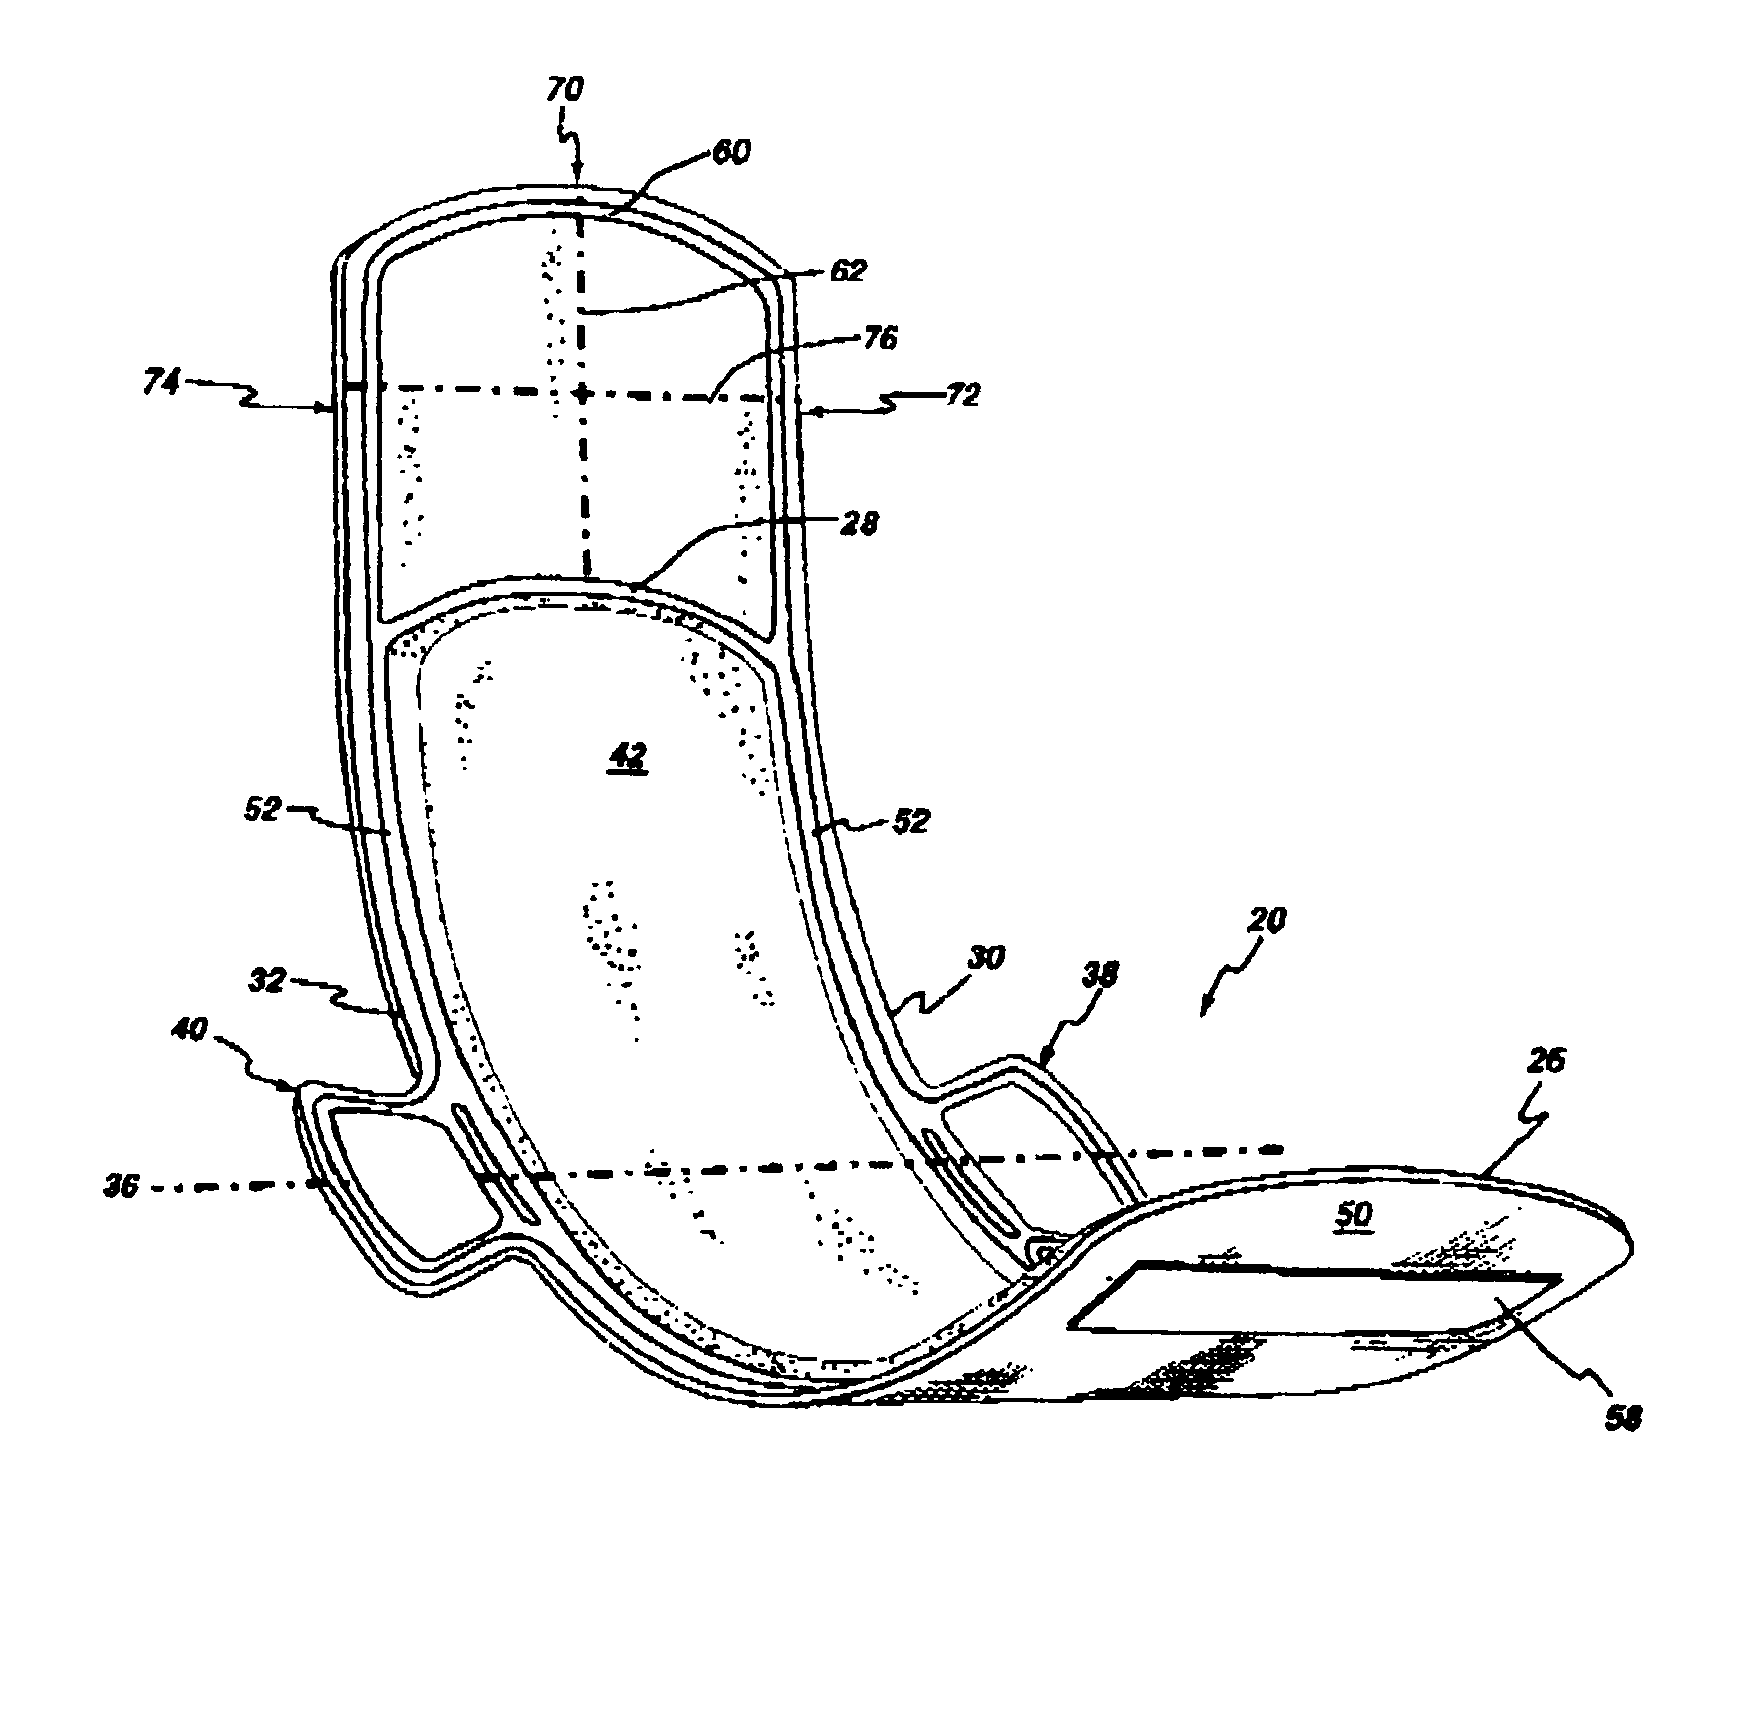 Sanitary napkin with rear extension providing a liquid blocking function